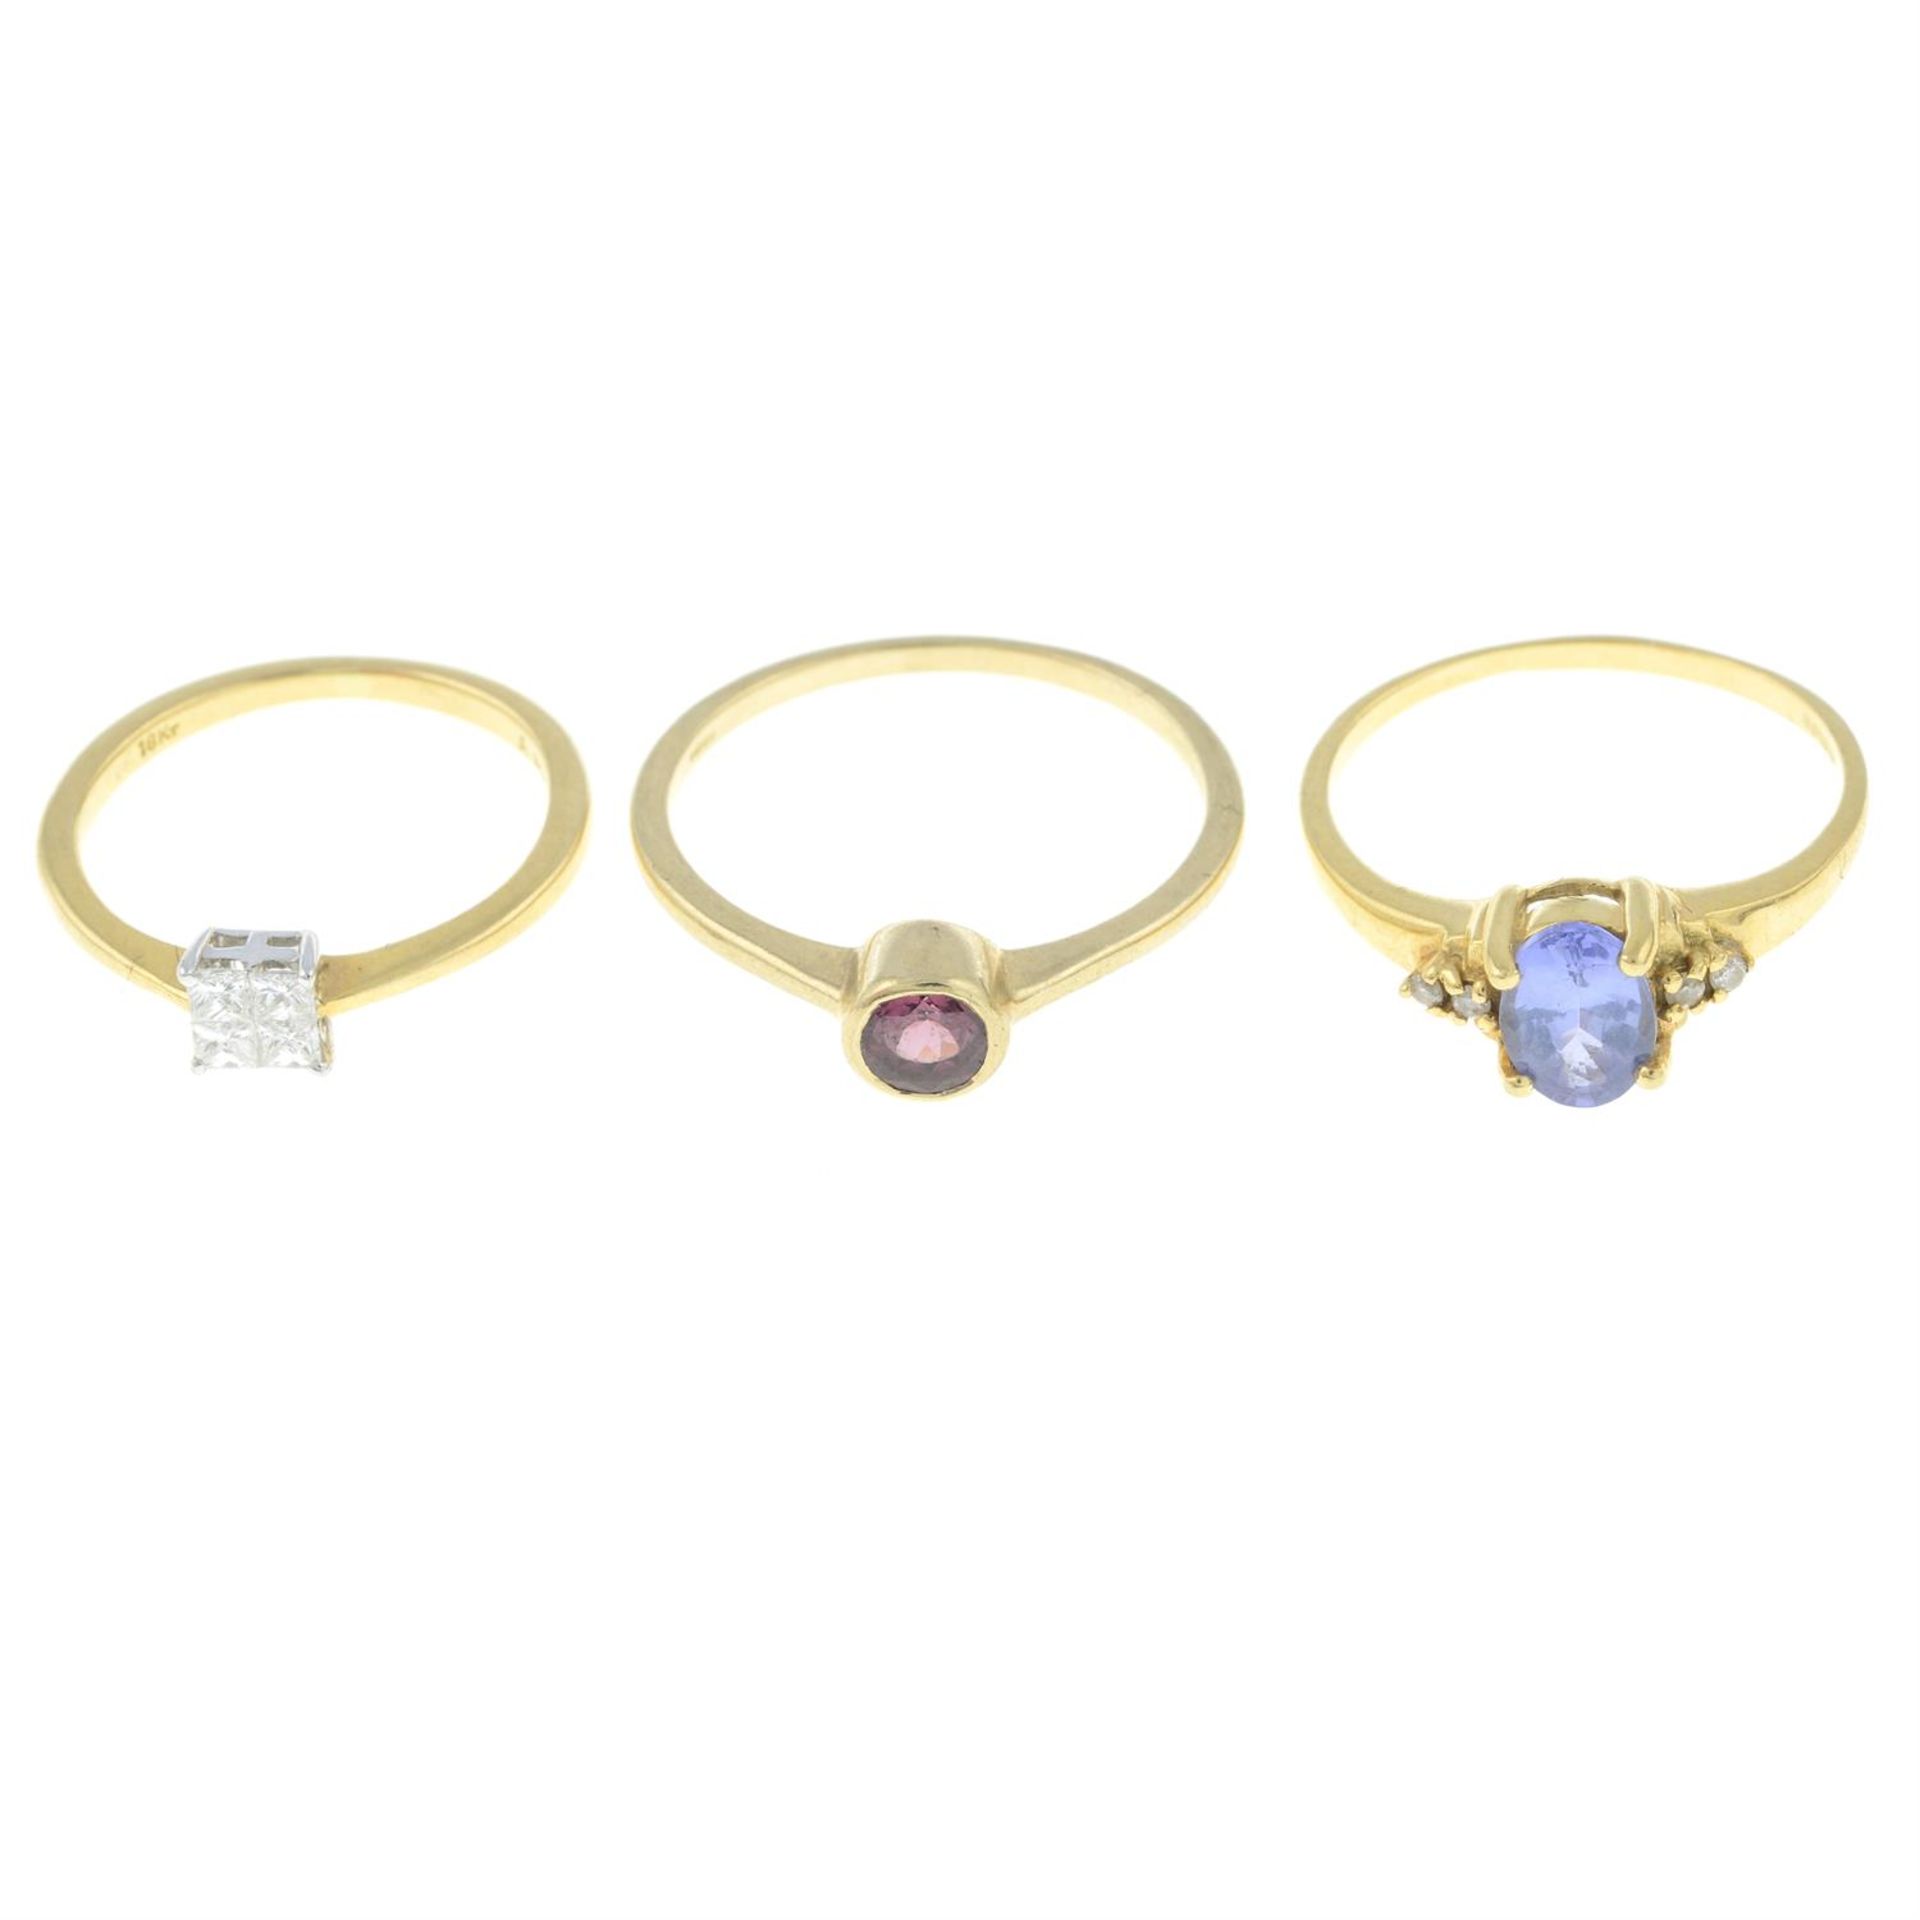 An 18ct gold diamond cluster ring, an 18ct gold tanzanite ring and a 9ct gold garnet ring.